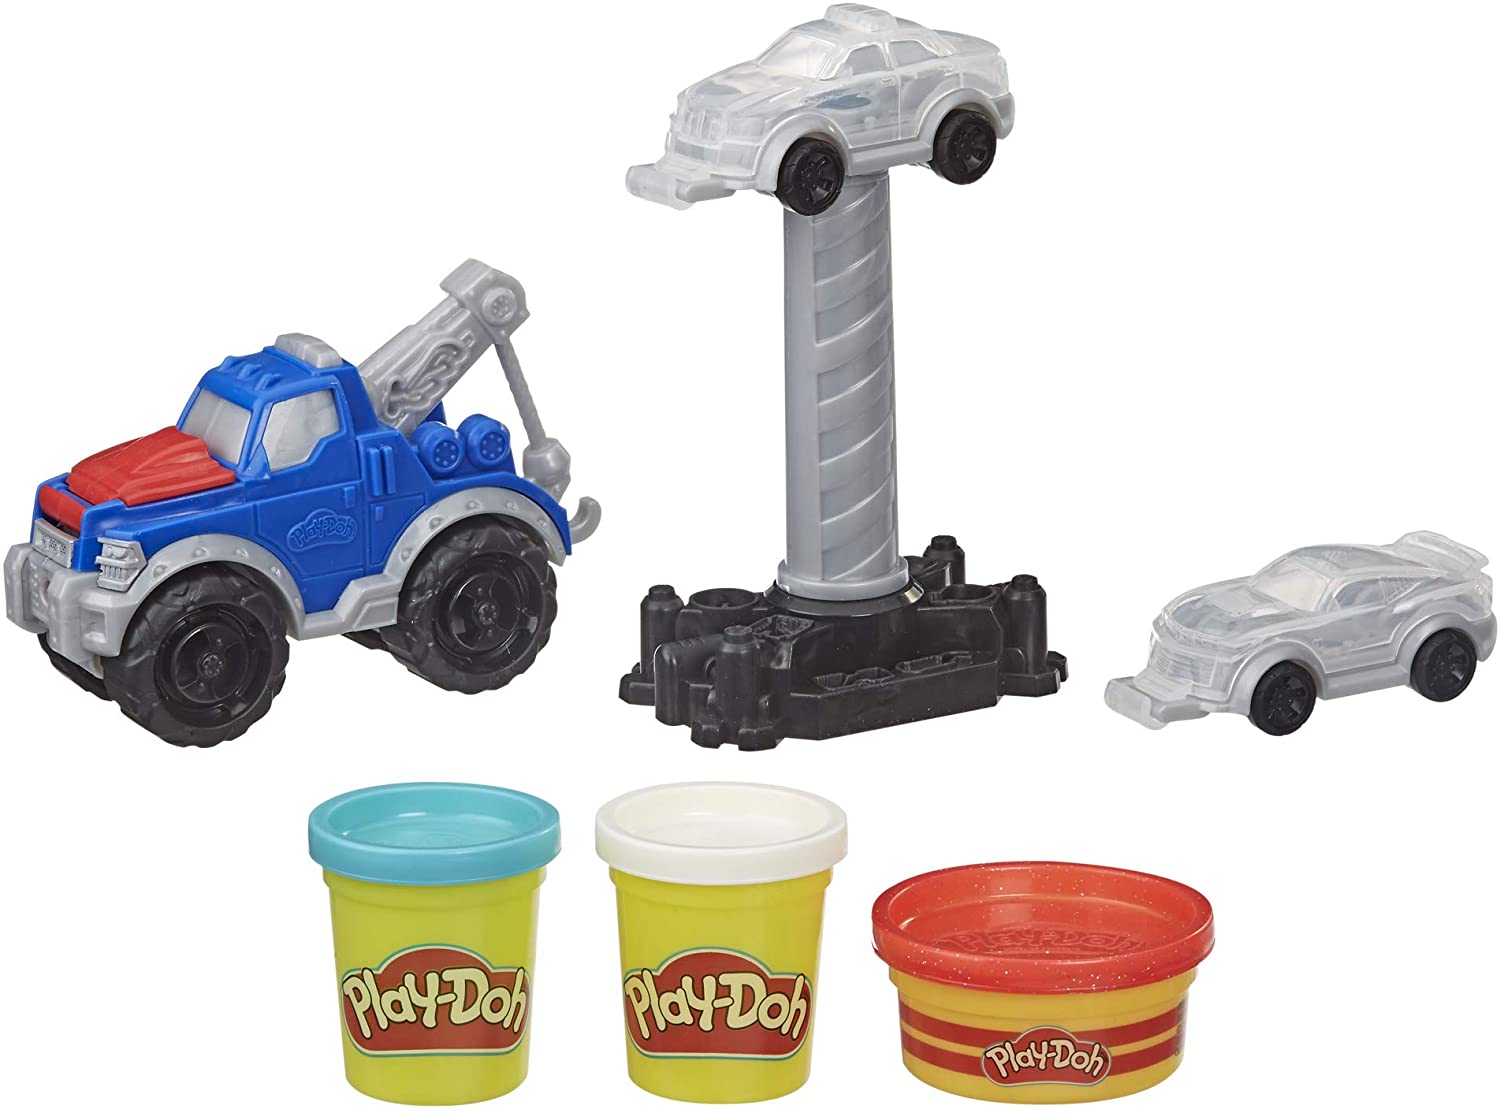 Play-Doh Wheels Tow Truck Toy Set w/ 3 Colors $6 + Free Shipping w/ Prime or on $25+